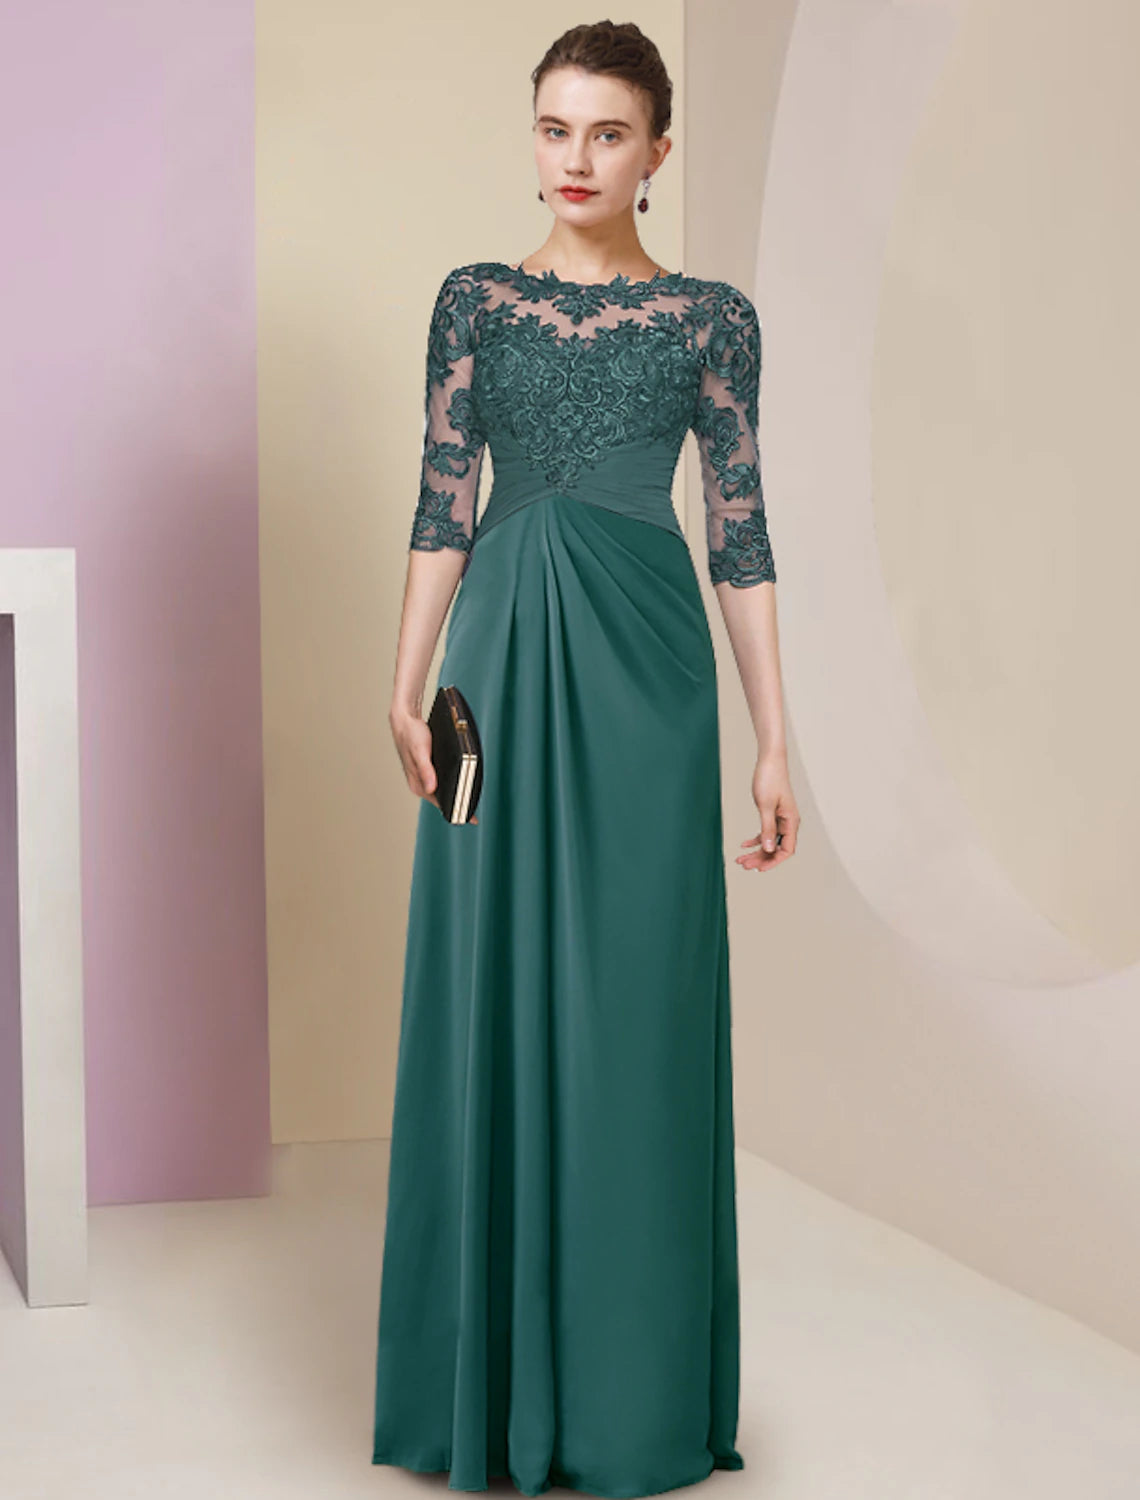 Sheath / Column Mother of the Bride Dress Simple Elegant Jewel Neck Floor Length Chiffon Lace Half Sleeve with Pleats Solid Color